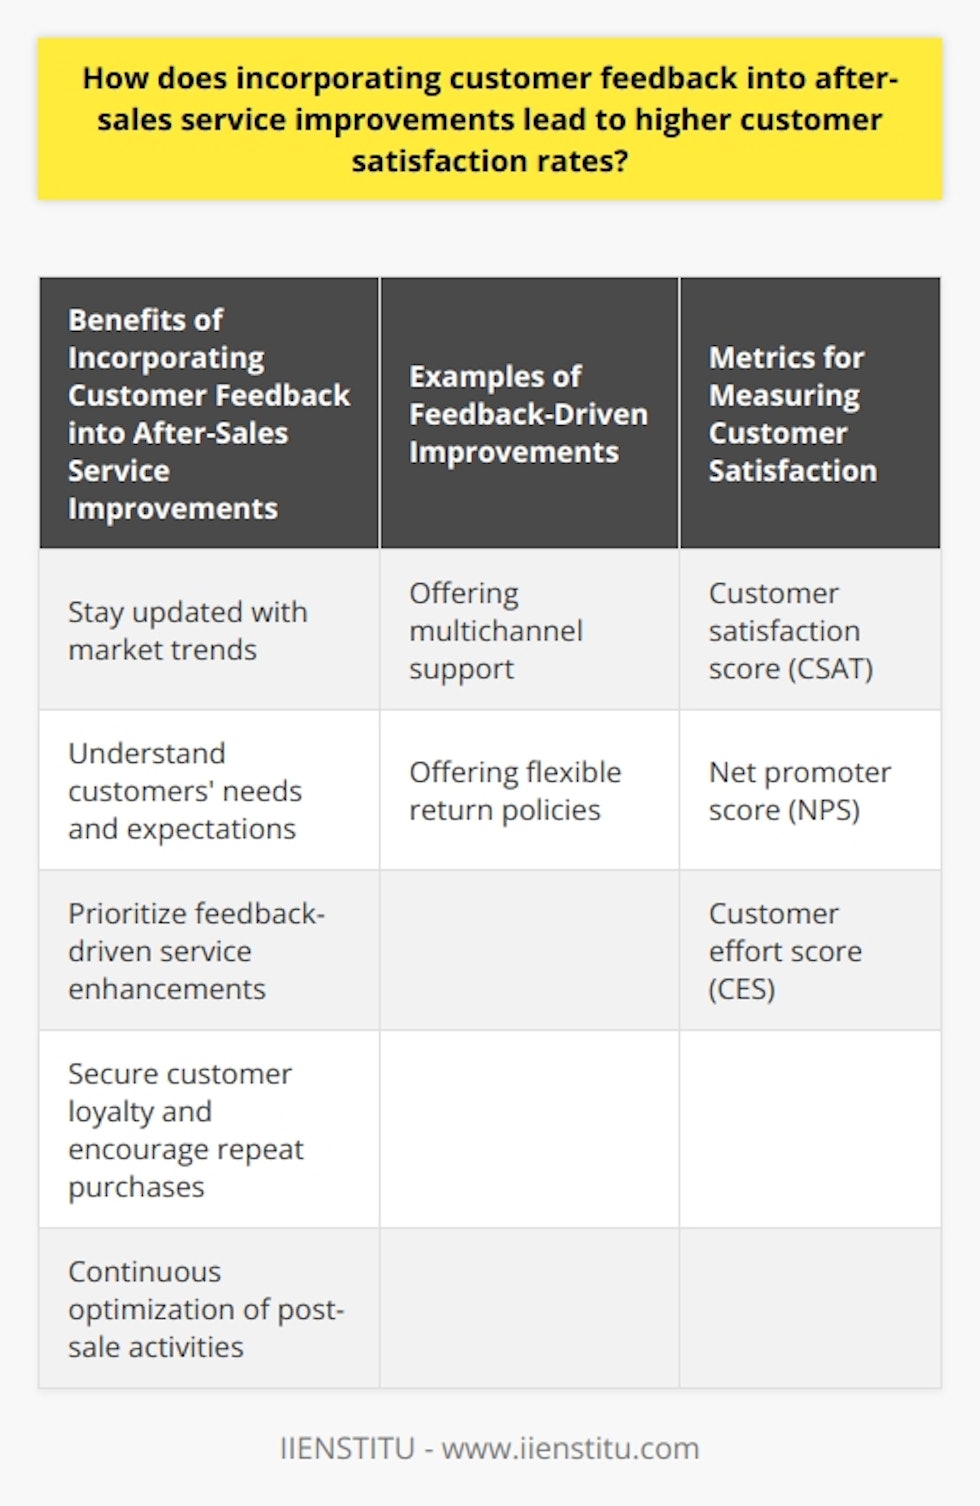 Incorporating customer feedback into after-sales service improvements is vital for achieving higher customer satisfaction rates. This process allows businesses to stay updated with market trends by understanding customers' needs and expectations. By prioritizing feedback-driven service enhancements, companies are better equipped to make necessary adjustments to maximize customers' overall experience.After-sales service is a crucial point of customer engagement. It includes product support, maintenance, and returns management, all of which are essential for securing customer loyalty and encouraging repeat purchases. Continuous optimization of post-sale activities is necessary to meet customers' evolving requirements and preferences.Customer feedback provides valuable insights for refining after-sales offerings. Collecting feedback through customer service inquiries, online reviews, and social media interactions allows companies to identify prevailing pain points. These insights help pinpoint areas for improvement and inform well-informed decisions about resource allocation.One example of a feedback-driven improvement is offering multichannel support. Customers often express their preference for multiple touchpoints with customer service, such as live chat, email, and phone. By facilitating accessible communication through customers' preferred channels, businesses can enhance their after-sales experience and increase satisfaction.Another example is offering flexible return policies. This improvement results from customers voicing frustration with rigid or complicated return processes. By adopting a hassle-free and customer-centric approach to returns, businesses can eliminate a common pain point, fostering satisfaction and trust.Measuring customer satisfaction is essential for evaluating the impact of service improvements. Metrics like customer satisfaction score (CSAT), net promoter score (NPS), and customer effort score (CES) allow companies to assess the effectiveness of feedback-driven enhancements. These indicators provide a roadmap for ongoing service adjustments based on overall customer sentiment and satisfaction.In conclusion, incorporating customer feedback into after-sales service improvements leads to higher customer satisfaction rates. By listening to customers, addressing service shortcomings, and providing an overall better experience, businesses can foster positive relationships that result in long-term loyalty and increased revenue.